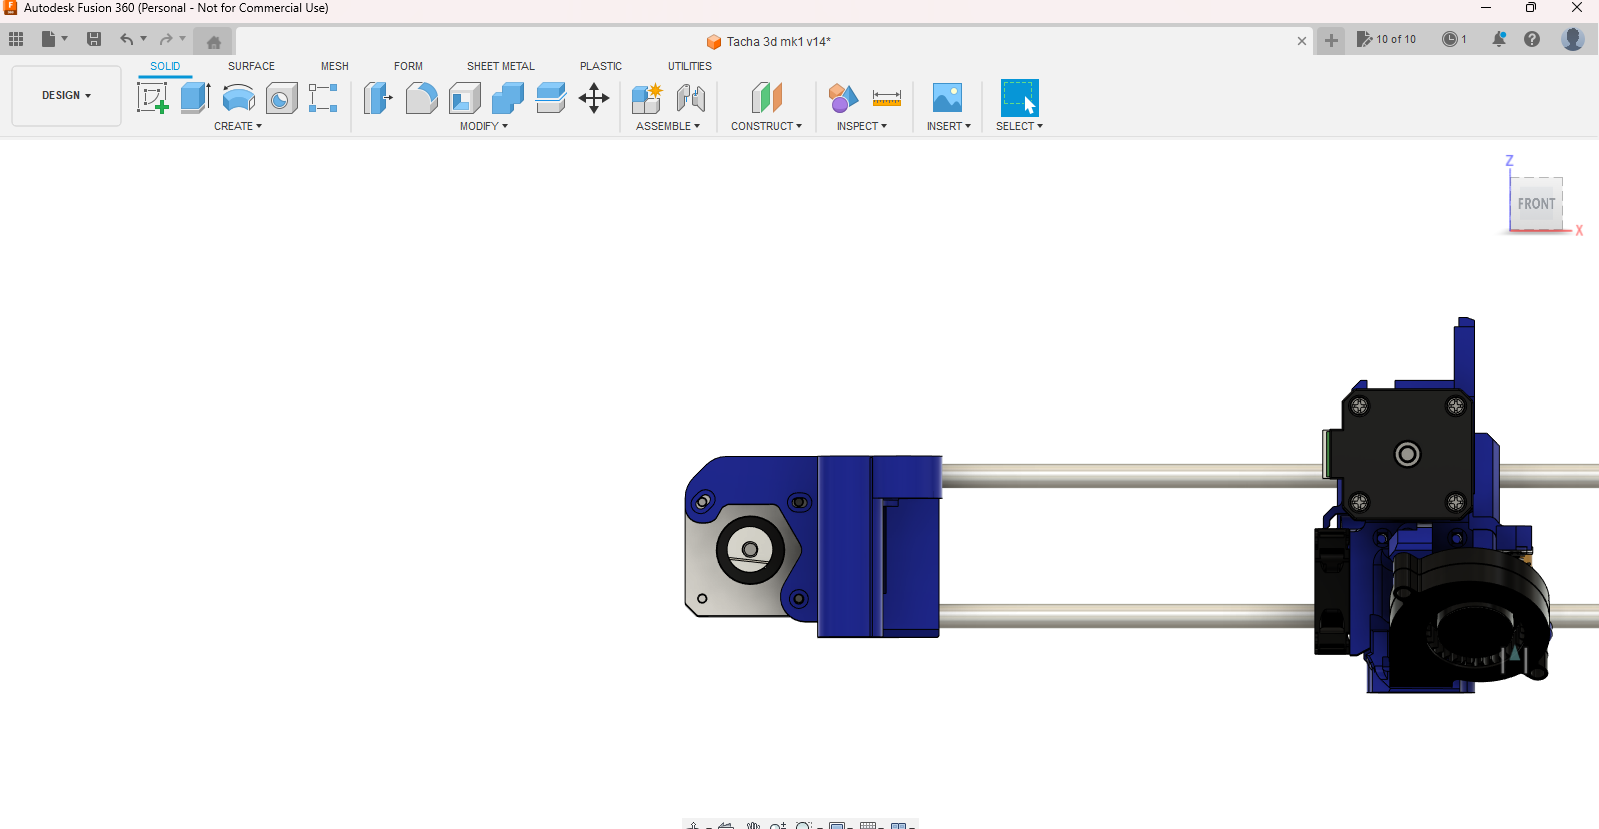 Autodesk Fusion 360 (Personal - Not for Commercial Use) 6_30_2023 9_08_29 PM.png